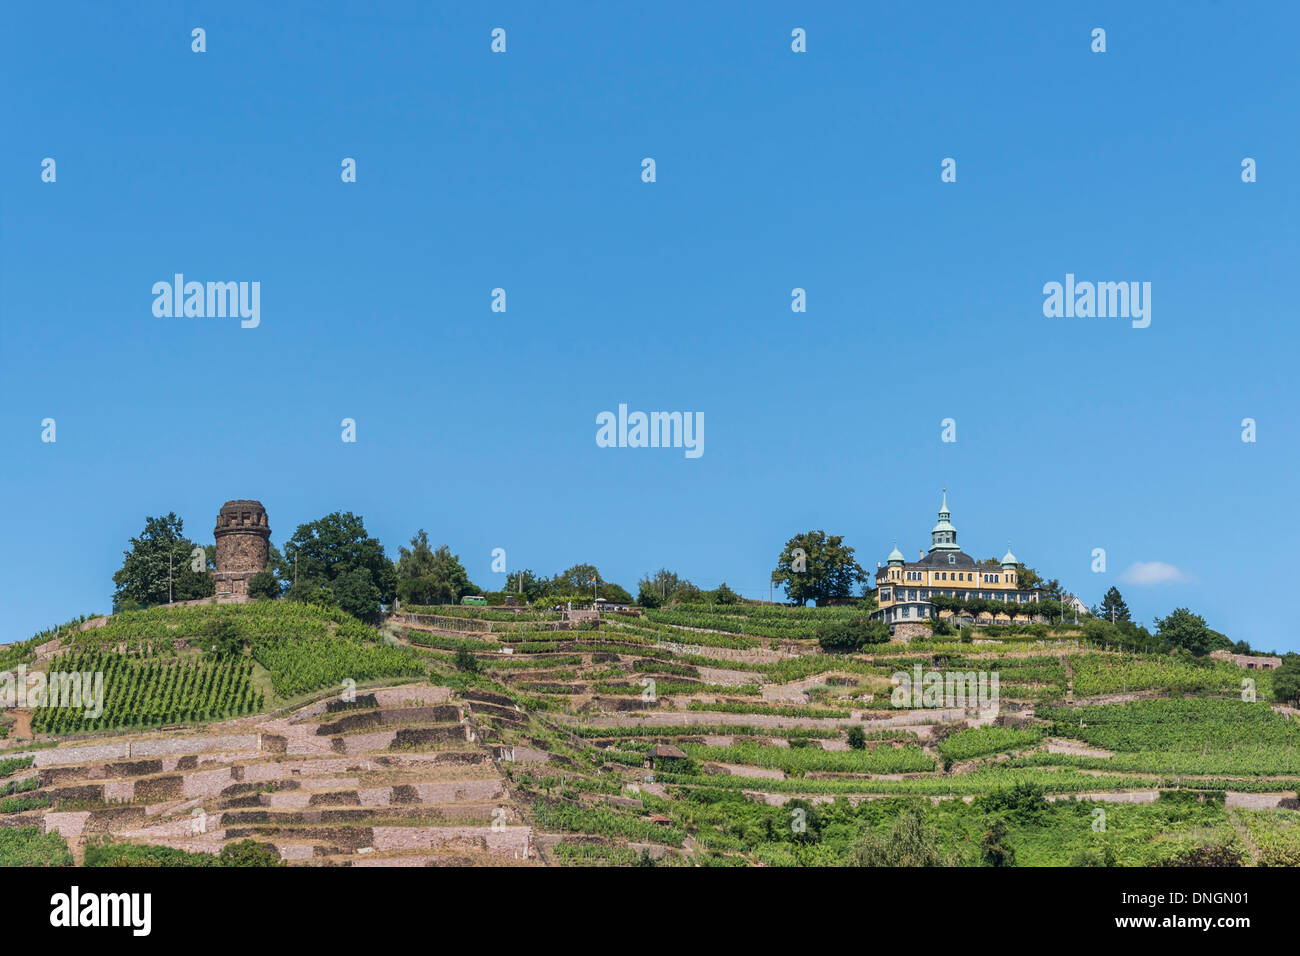 View of the vineyards, the Bismarck Tower and Spitz House, Radebeul near Dresden, Saxony, Germany, Europe Stock Photo